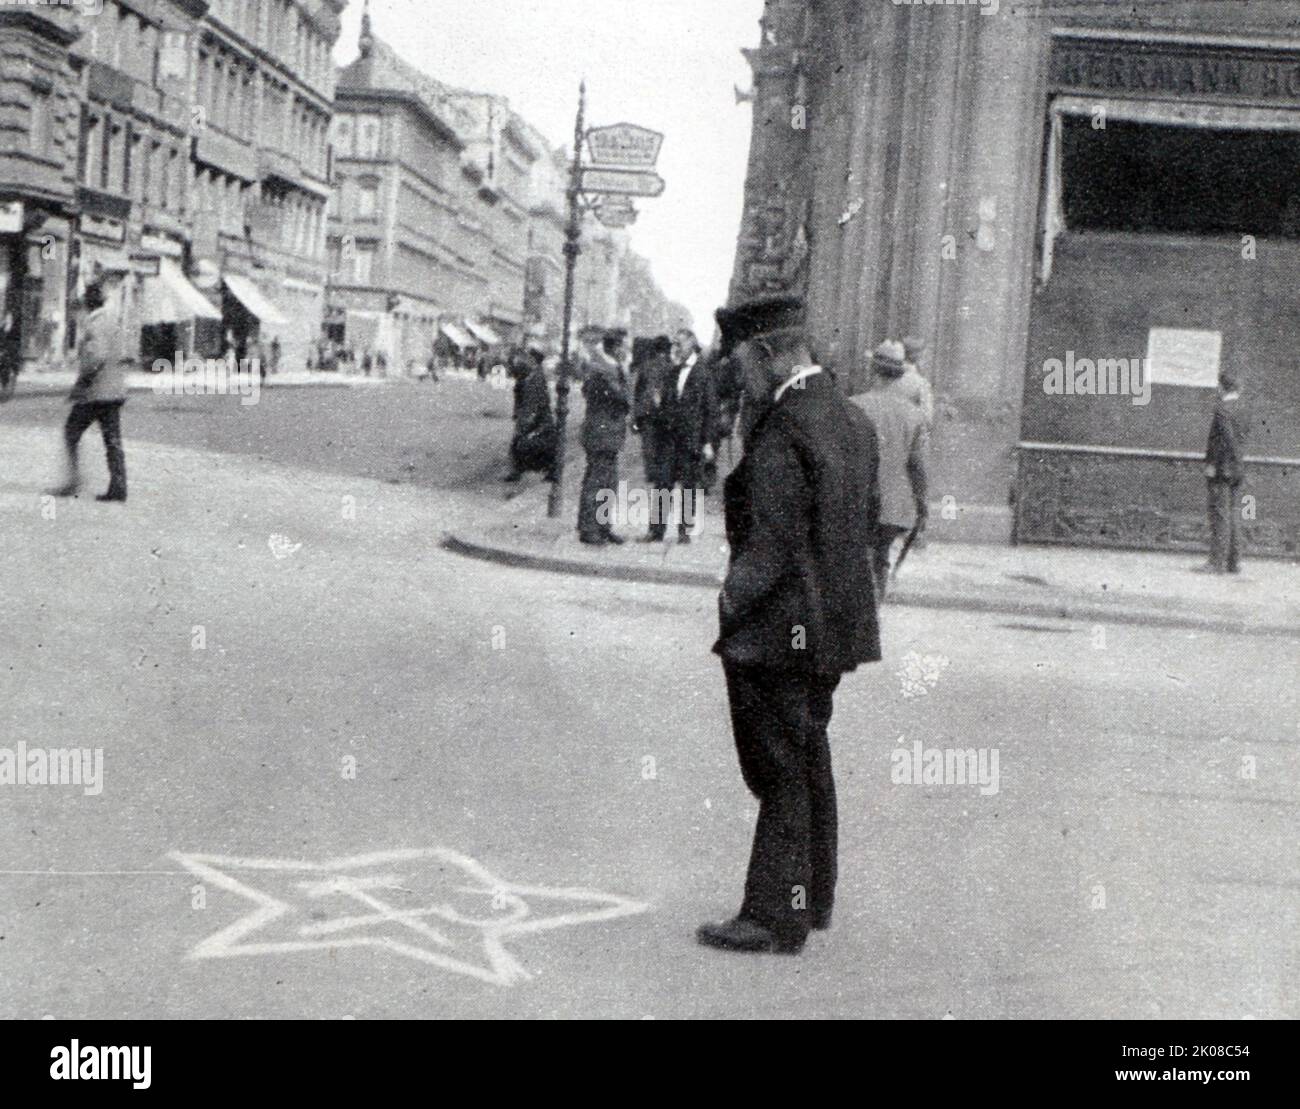 Painted by Communists on a famous broadway in Berlin during the night: The symbol of the Soviet, Hammer and Sickle, in the Friedrichstrasse Stock Photo